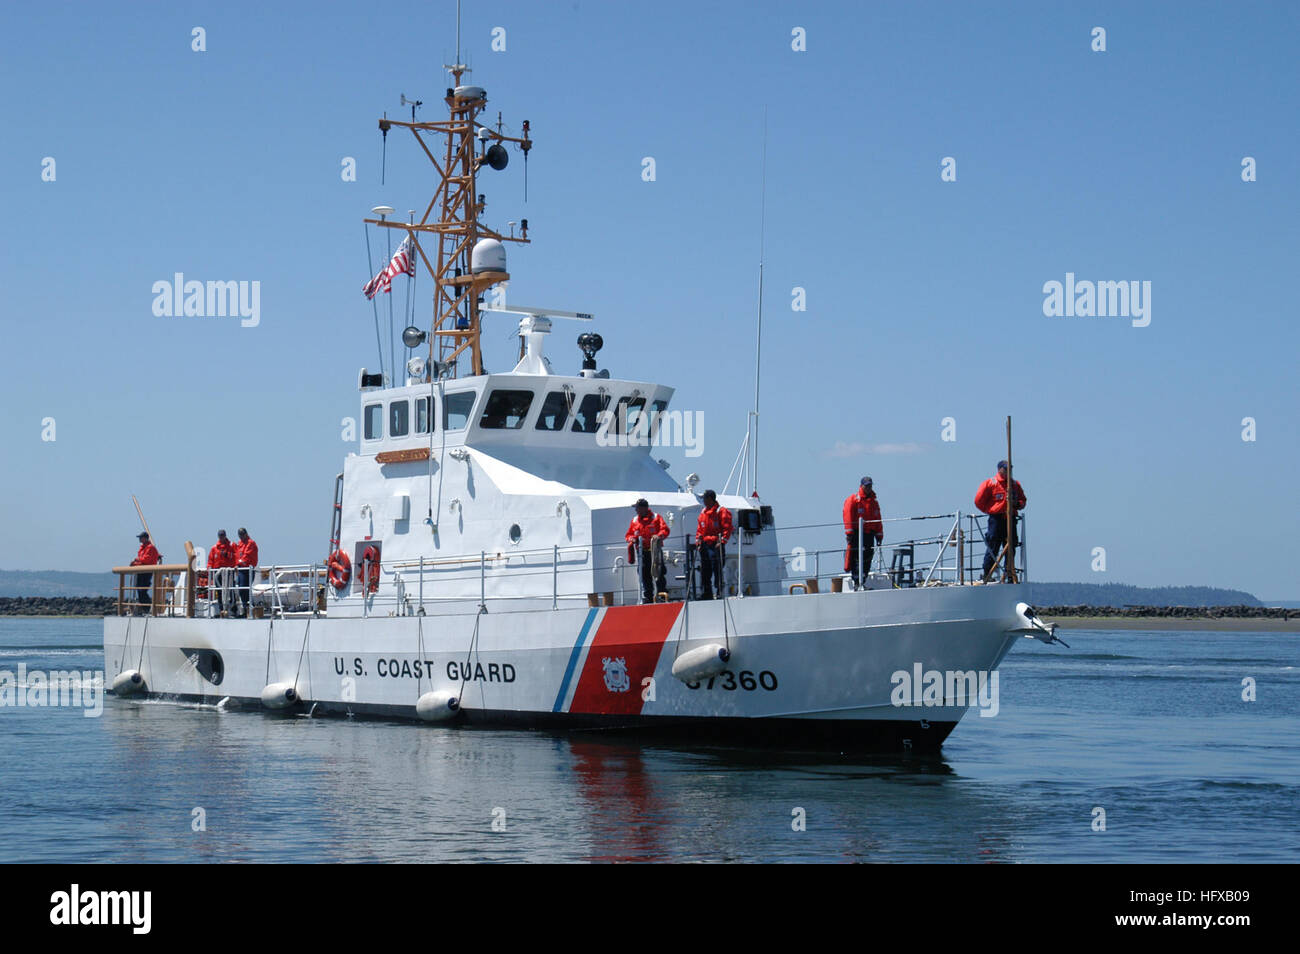 050719-N-9293K-009 Everett, Wash. (July 19, 2005) – The U.S. Coast Guard cutter USCGC Blue Shark (WPB 87360) arrives at its new homeport of Everett, Wash., after an extensive three month underway period. Blue Shark consists of 10 coast guard members who left Louisiana in March to make their way around the country to arrive at Naval Station Everett. The vessel will be commissioned this August 2005. U.S. Navy photo by Photographer's Mate 3rd Class Jacob J. Kirk (RELEASED) US Navy 050719-N-9293K-009 The U.S. Coast Guard cutter USCGC Blue Shark (WPB 87360) arrives at its new homeport of Everett, W Stock Photo